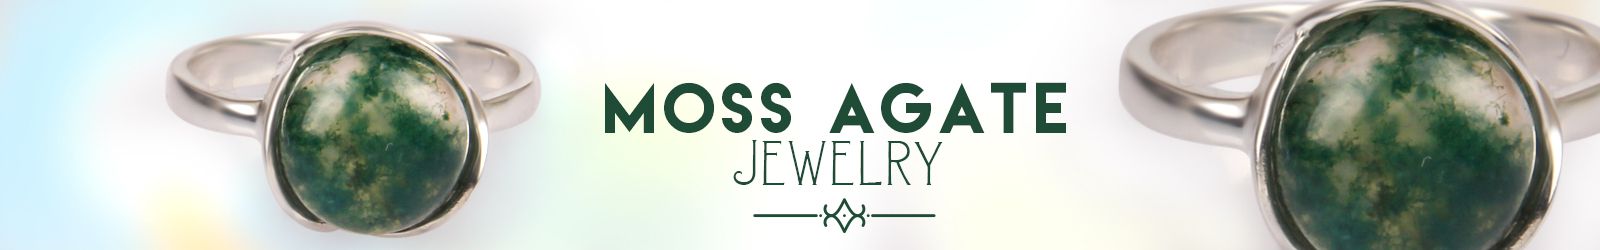 Wholesale moss agate jewelry manufacturer in India